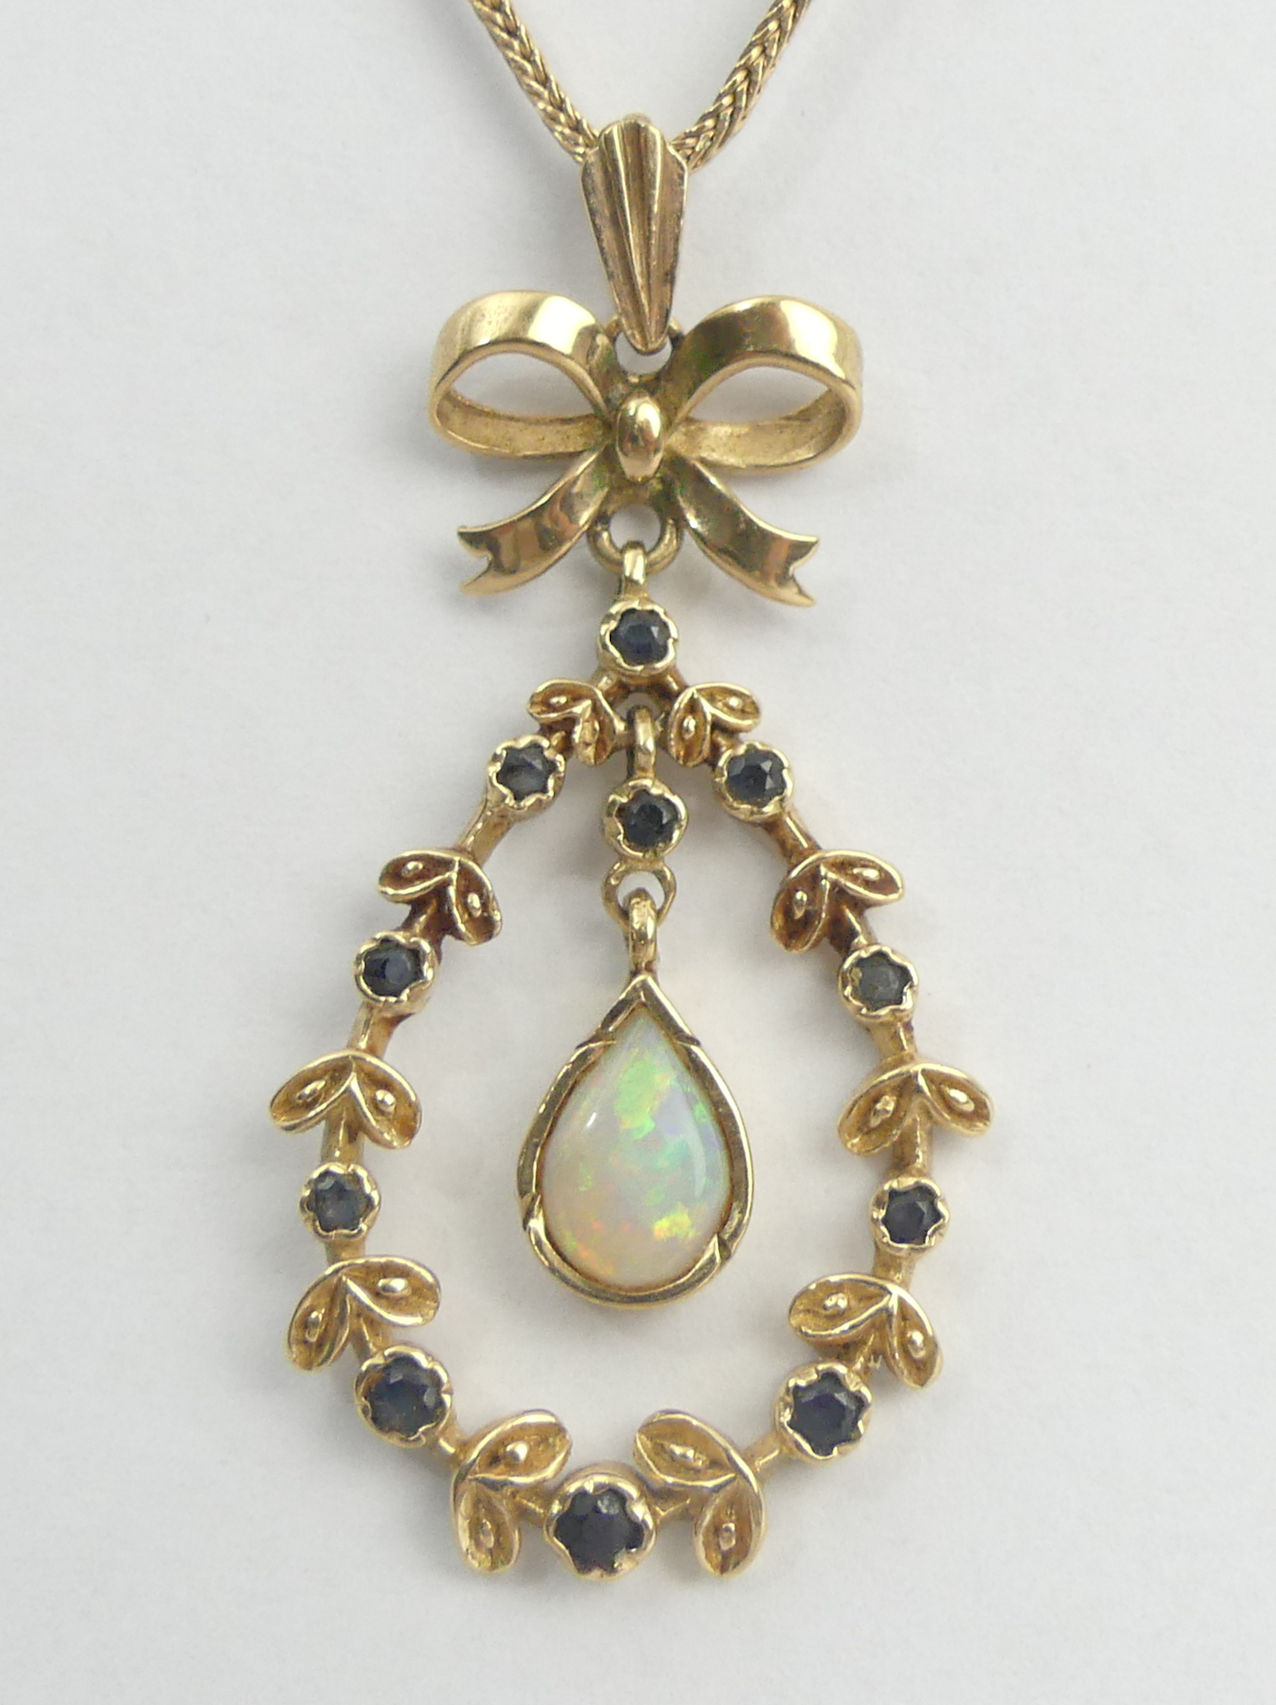 9ct gold sapphire and opal pendant and chain, 88 grams. Pendant 47 mm, chain 50 cm. UK Postage £12.